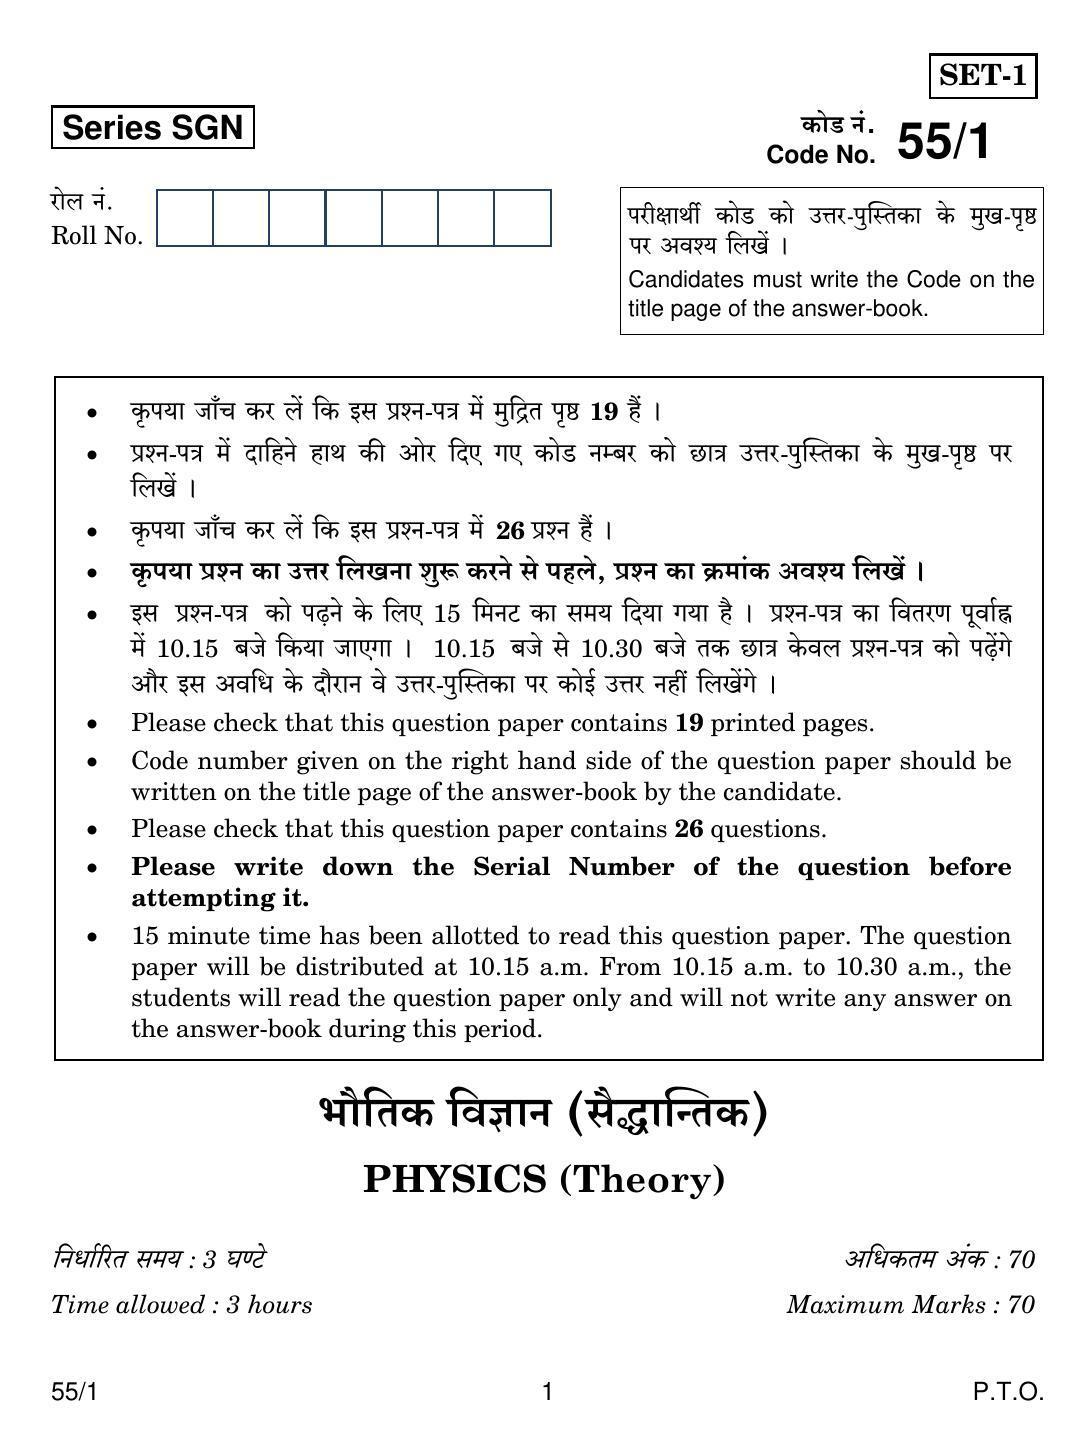 CBSE Class 12 55-1 PHYSICS 2018 Question Paper - Page 1